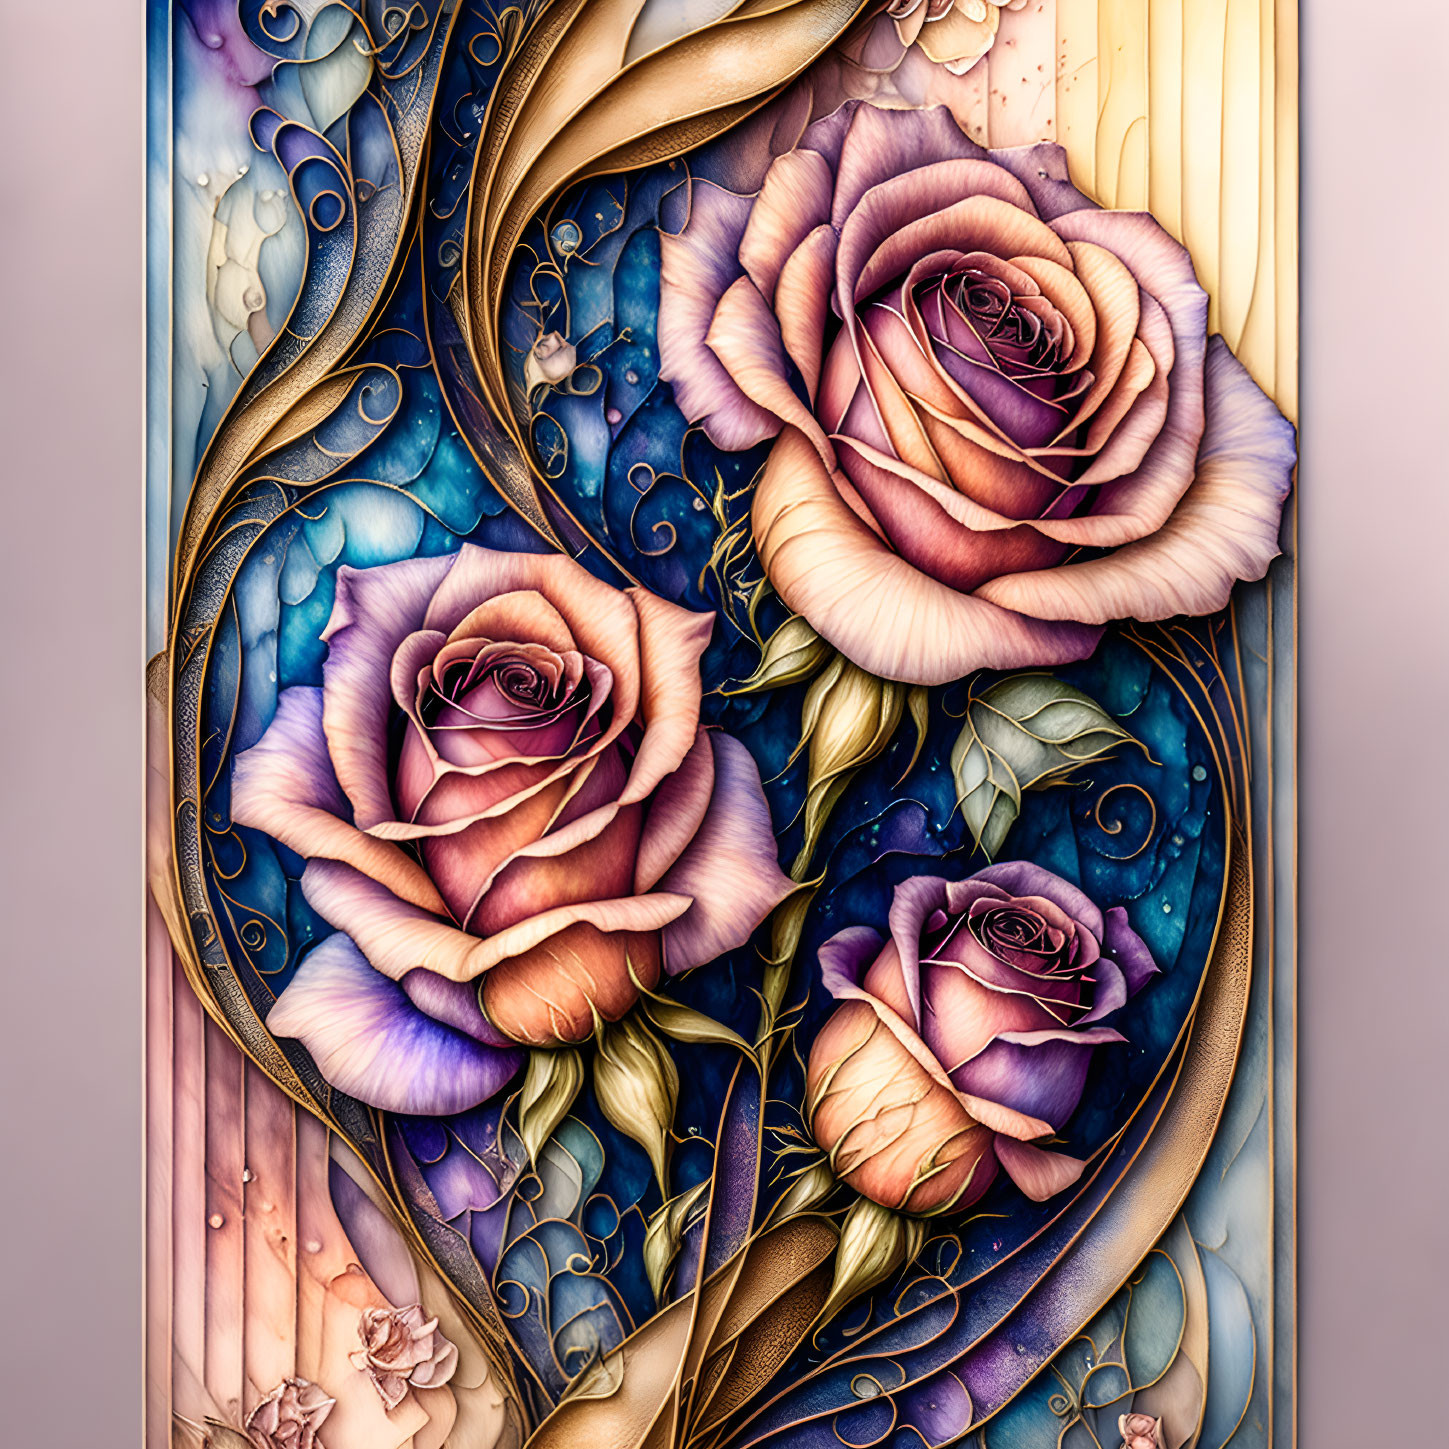 Stylized illustration of blooming roses in pink and purple with golden swirls